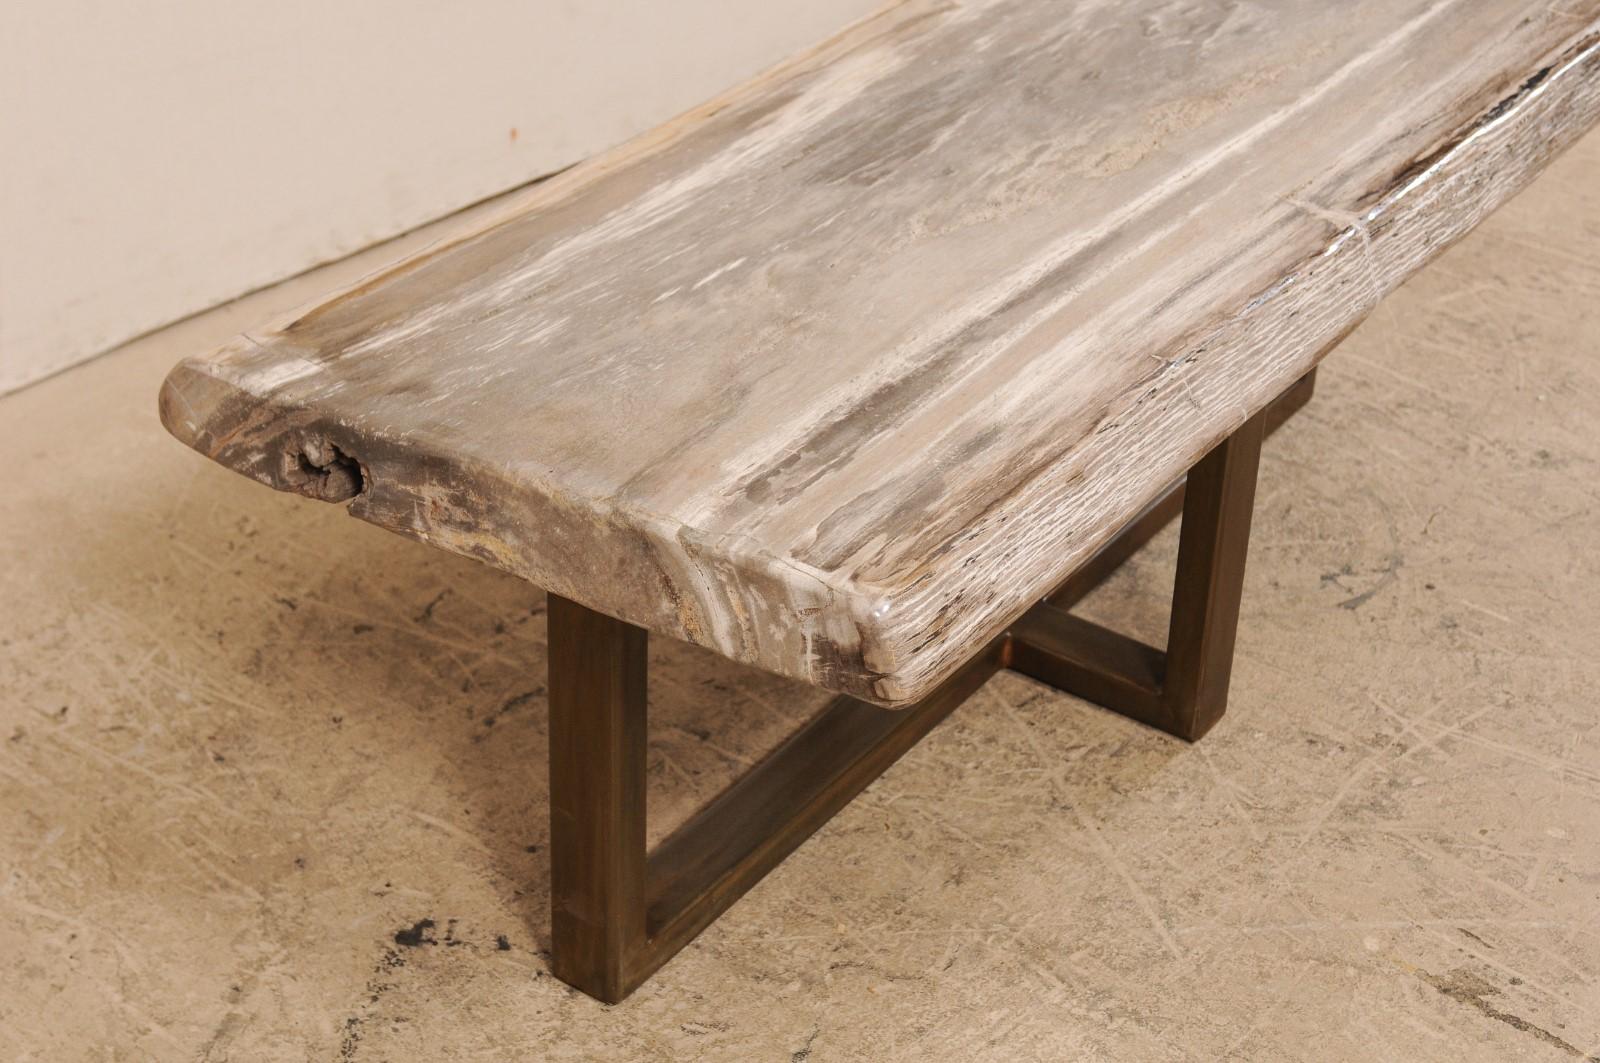 Polished Petrified Wood Coffee Table or Bench with Modern Metal Base 3